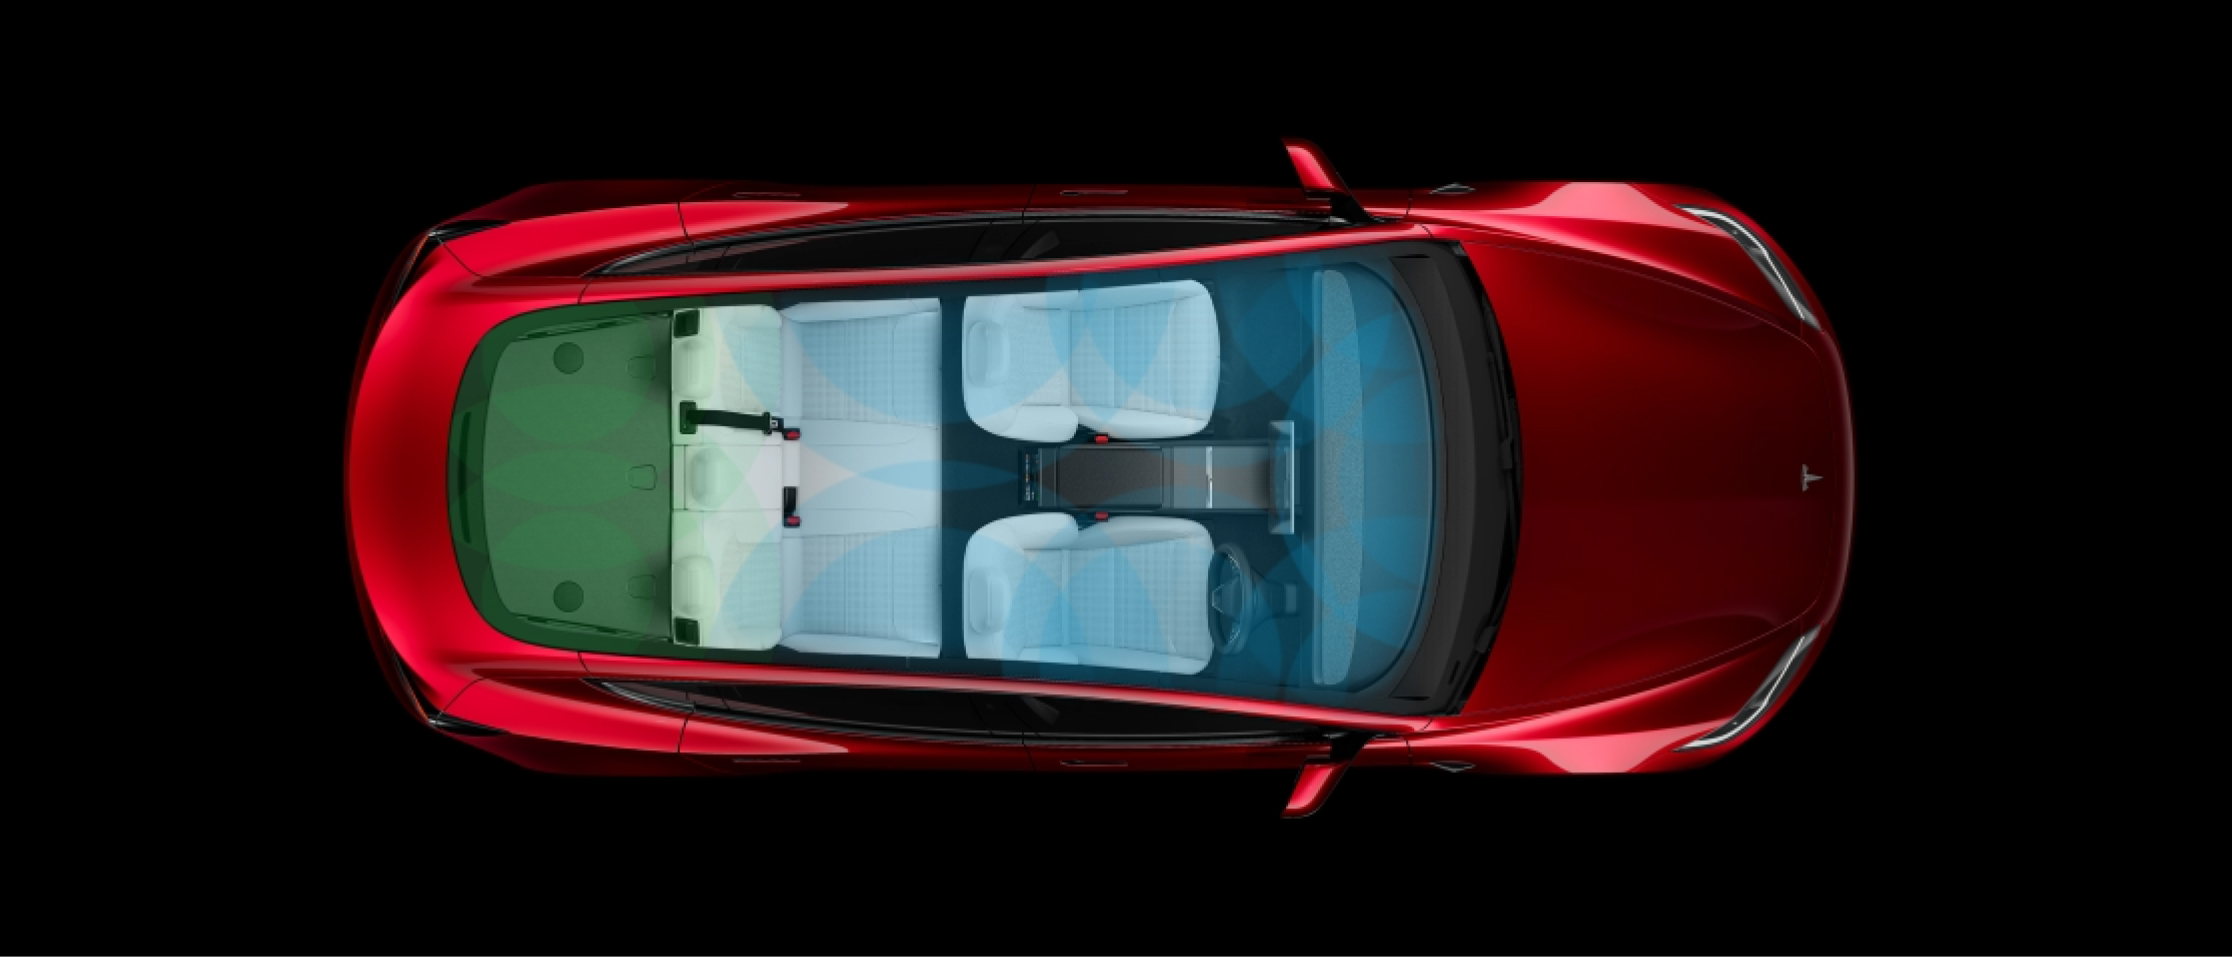 Tesla Model 3 Highland Update Coming Soon, According to Insiders